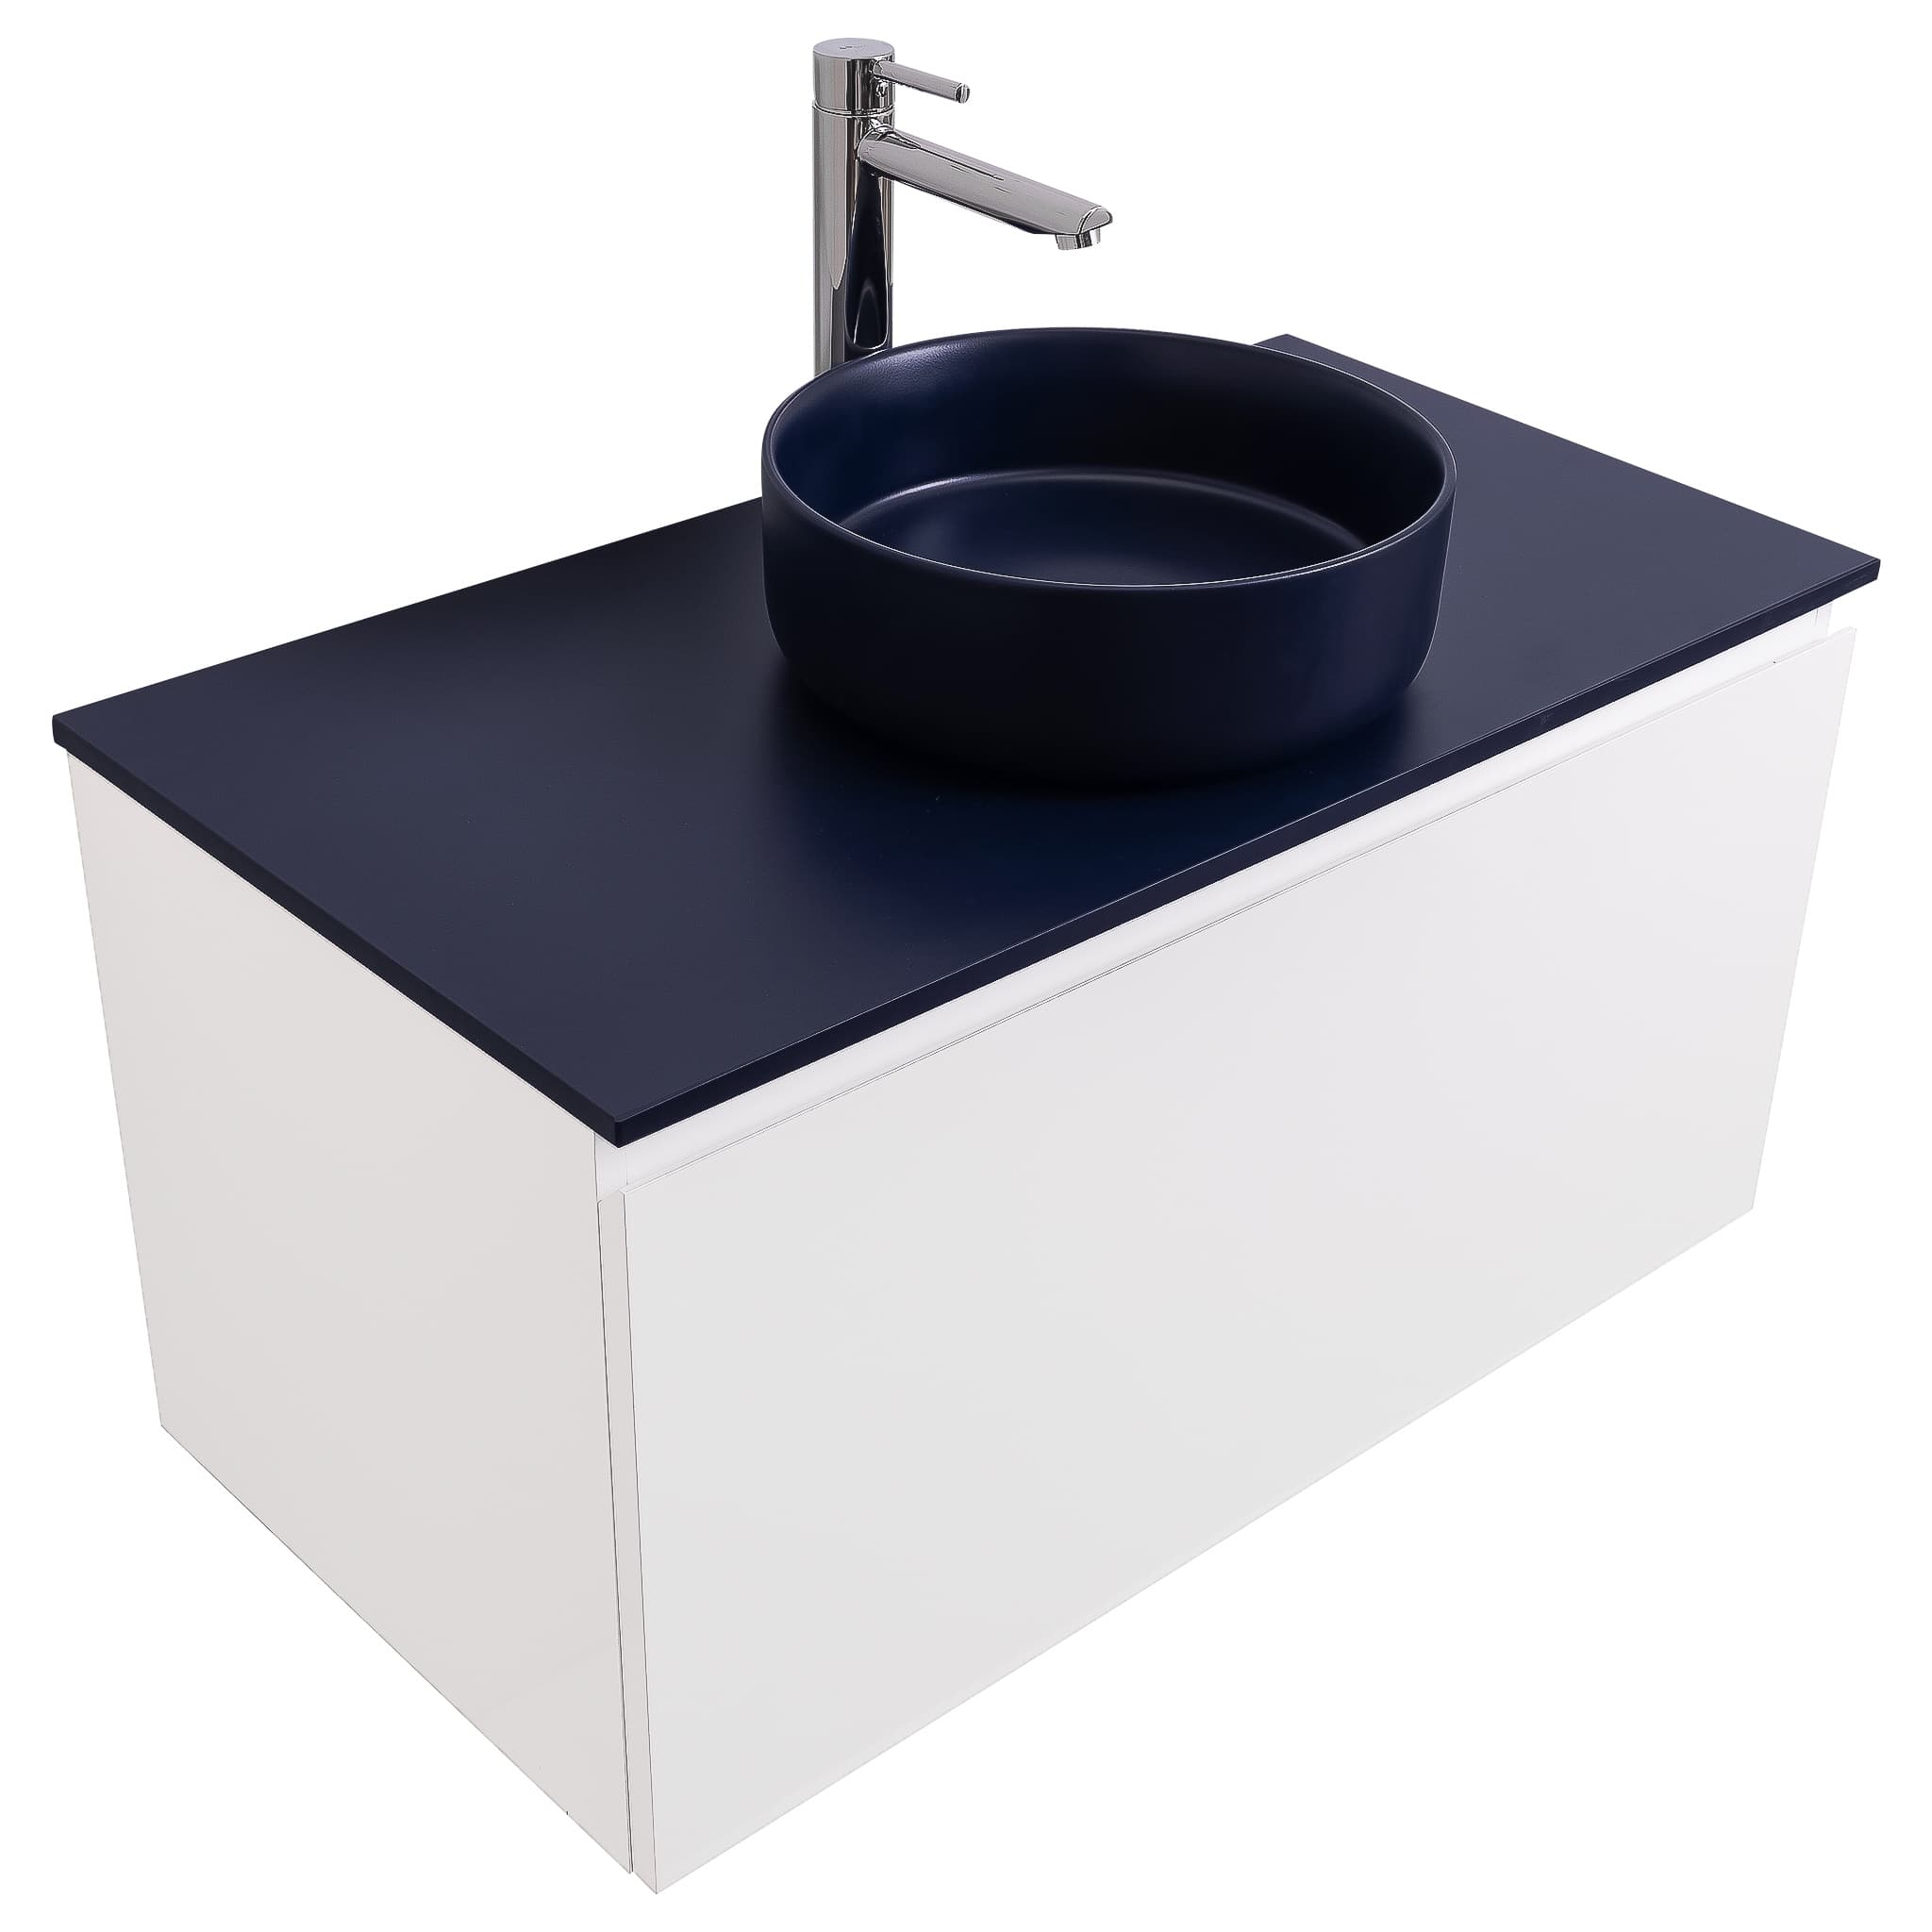 Venice 39.5 White High Gloss Cabinet, Ares Navy Blue Top And Ares Navy Blue Ceramic Basin, Wall Mounted Modern Vanity Set